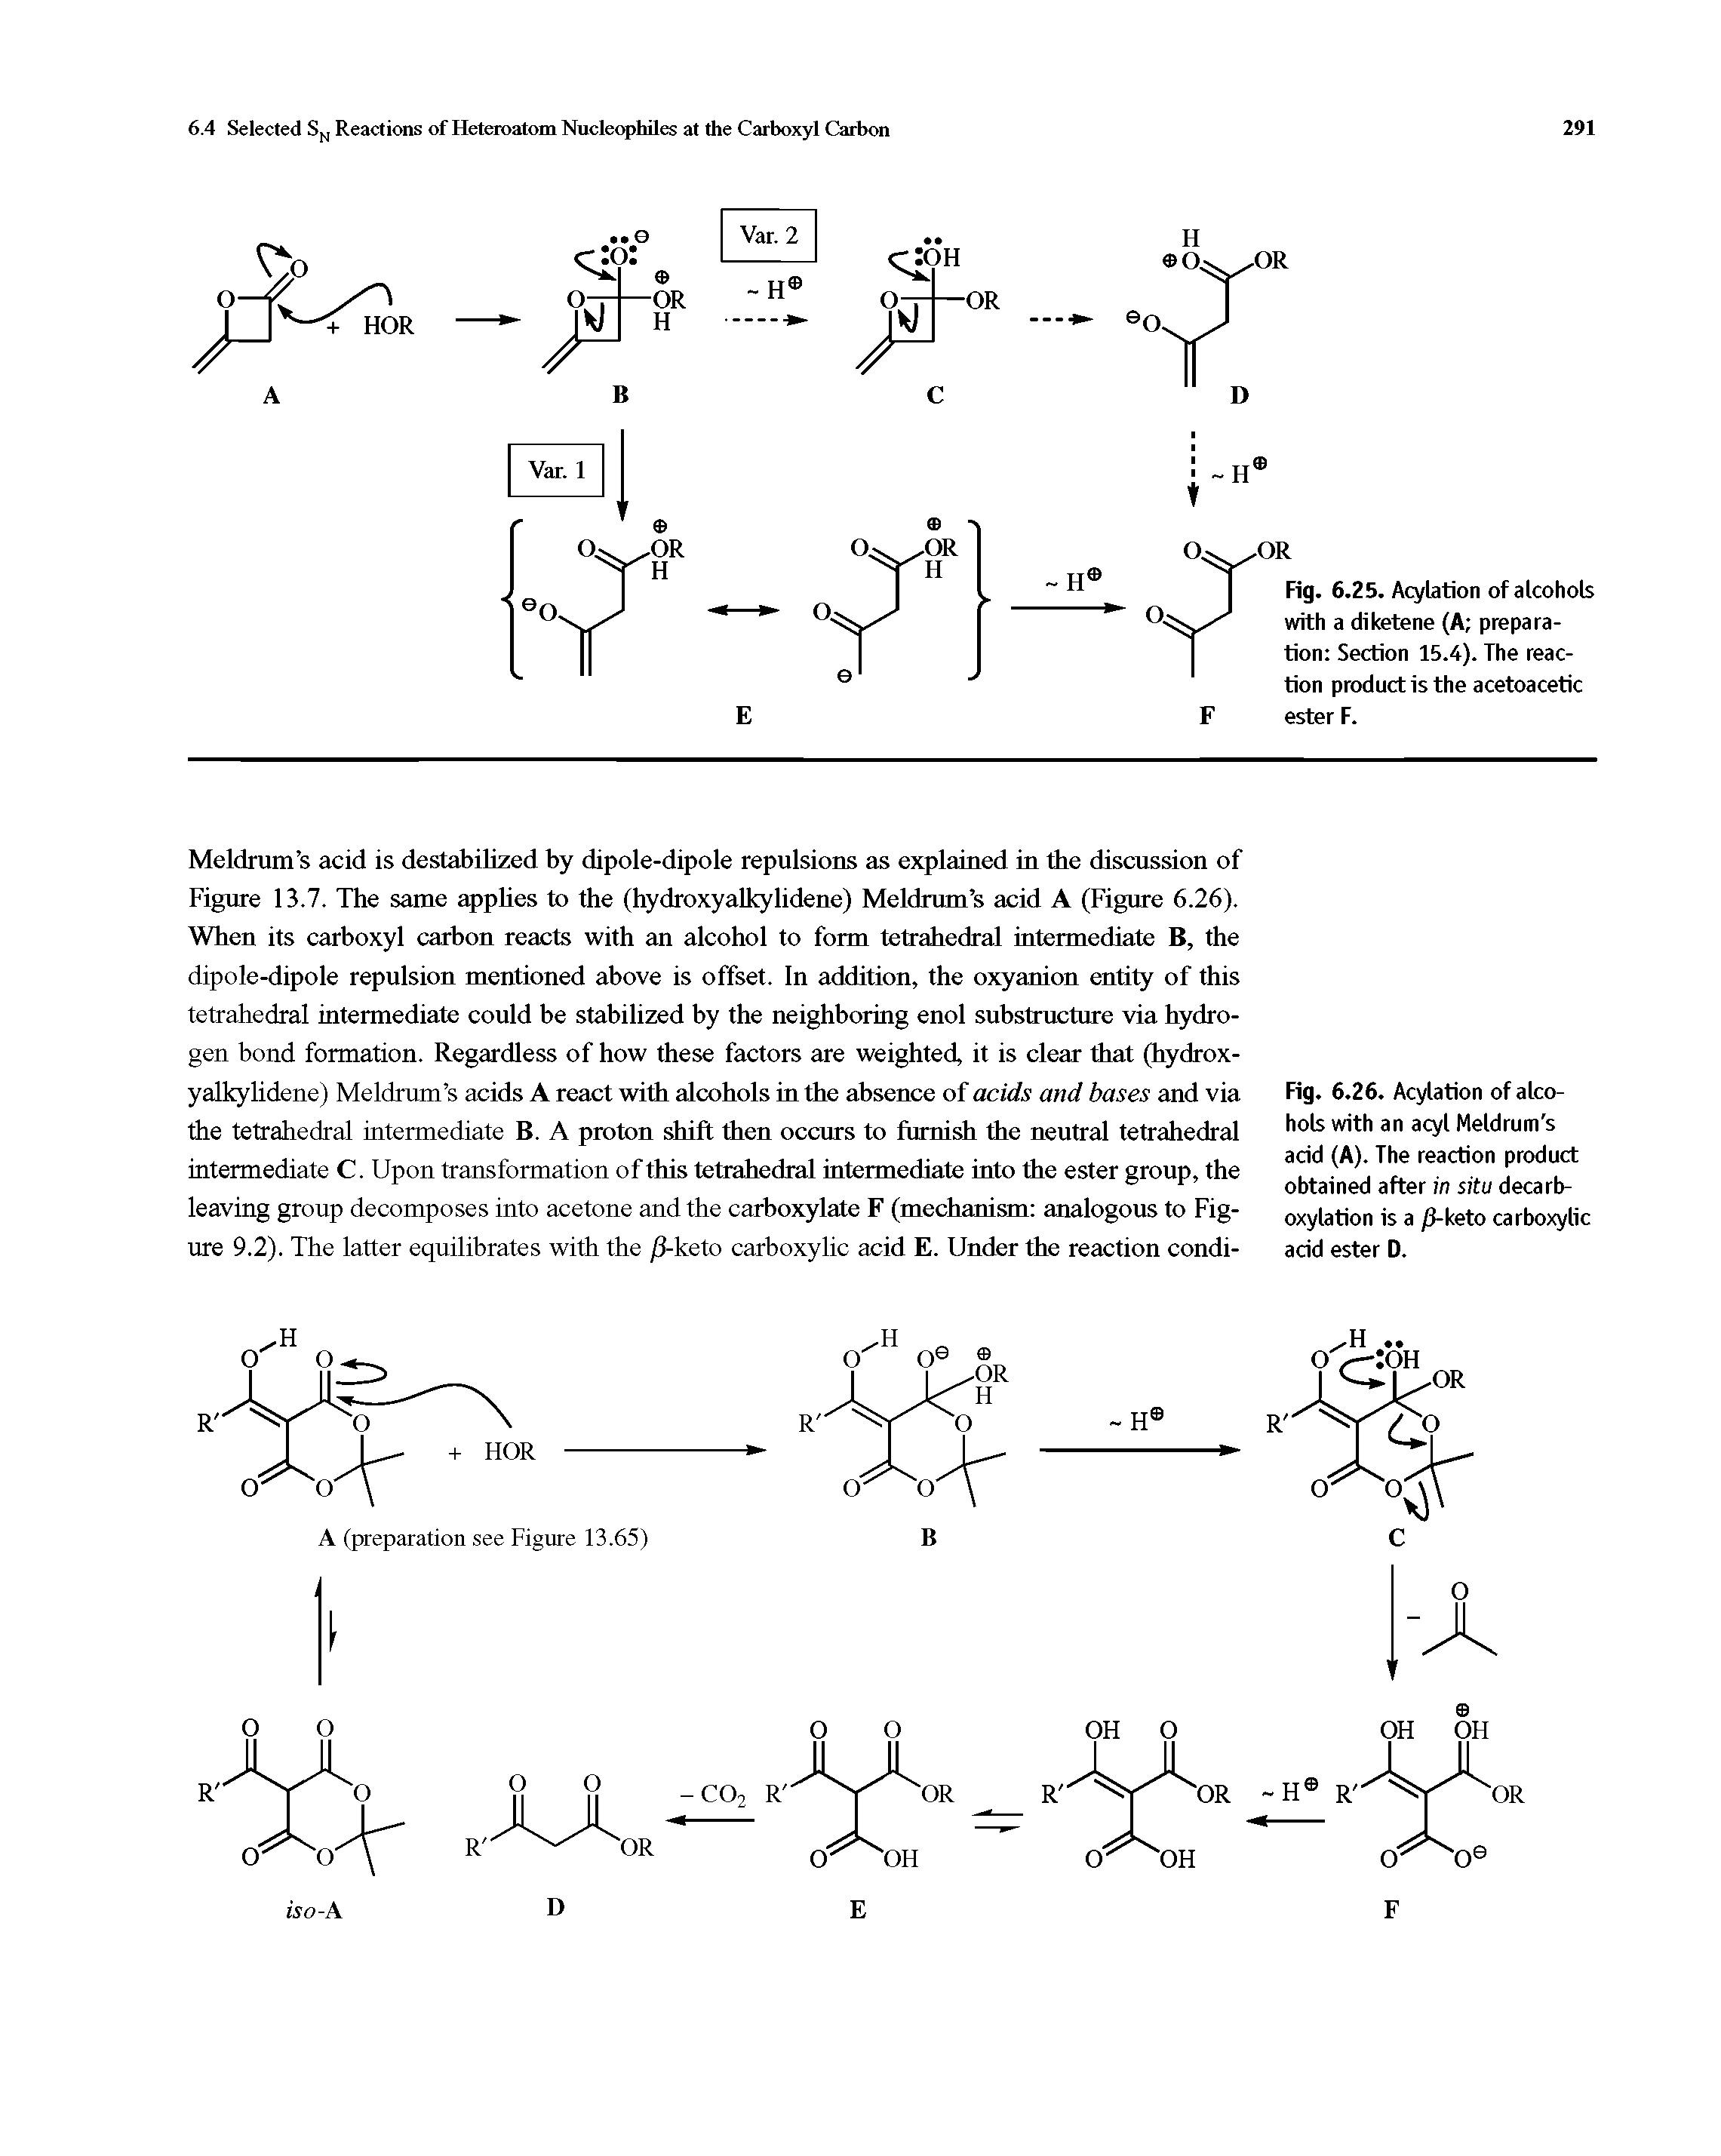 Fig. 6.26. Acylation of alcohols with an acyl Meldrum s acid (A). The reaction product obtained after in situ decarboxylation is a /l-keto carboxylic acid ester D.